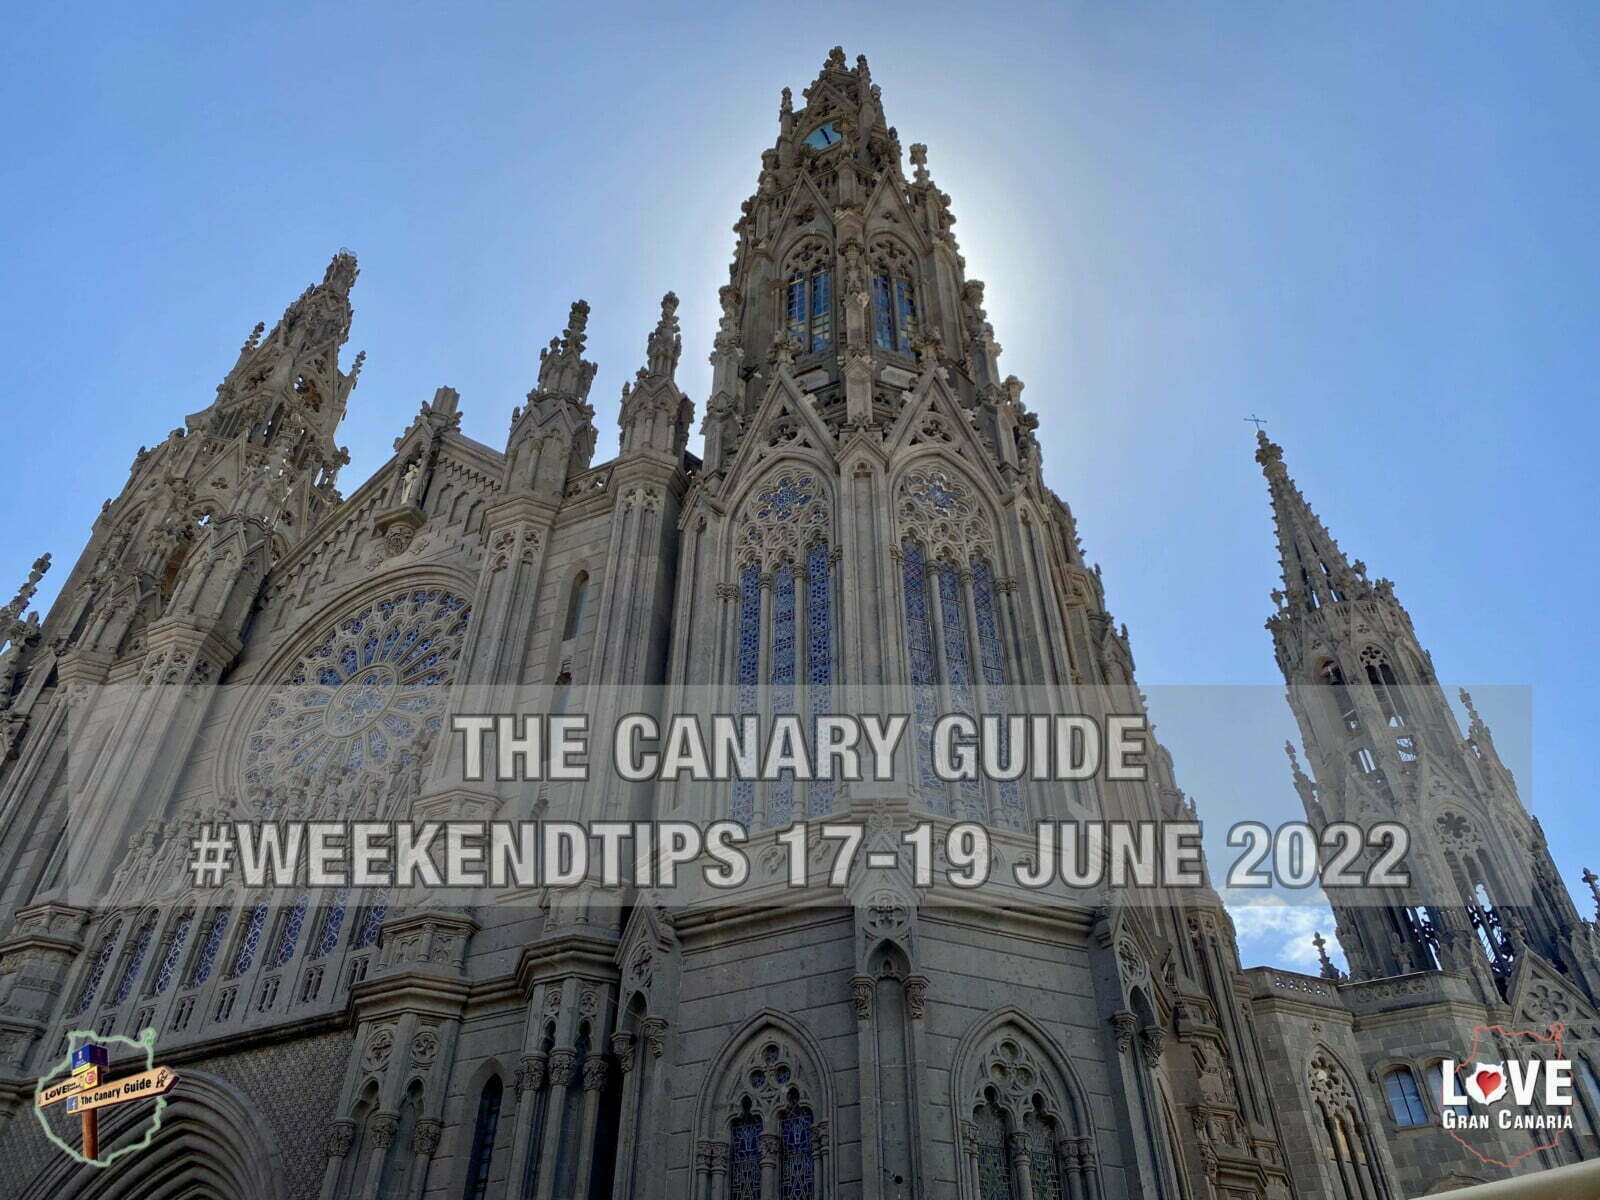 The Canary Guide #WeekendTips 17-19 June 2022